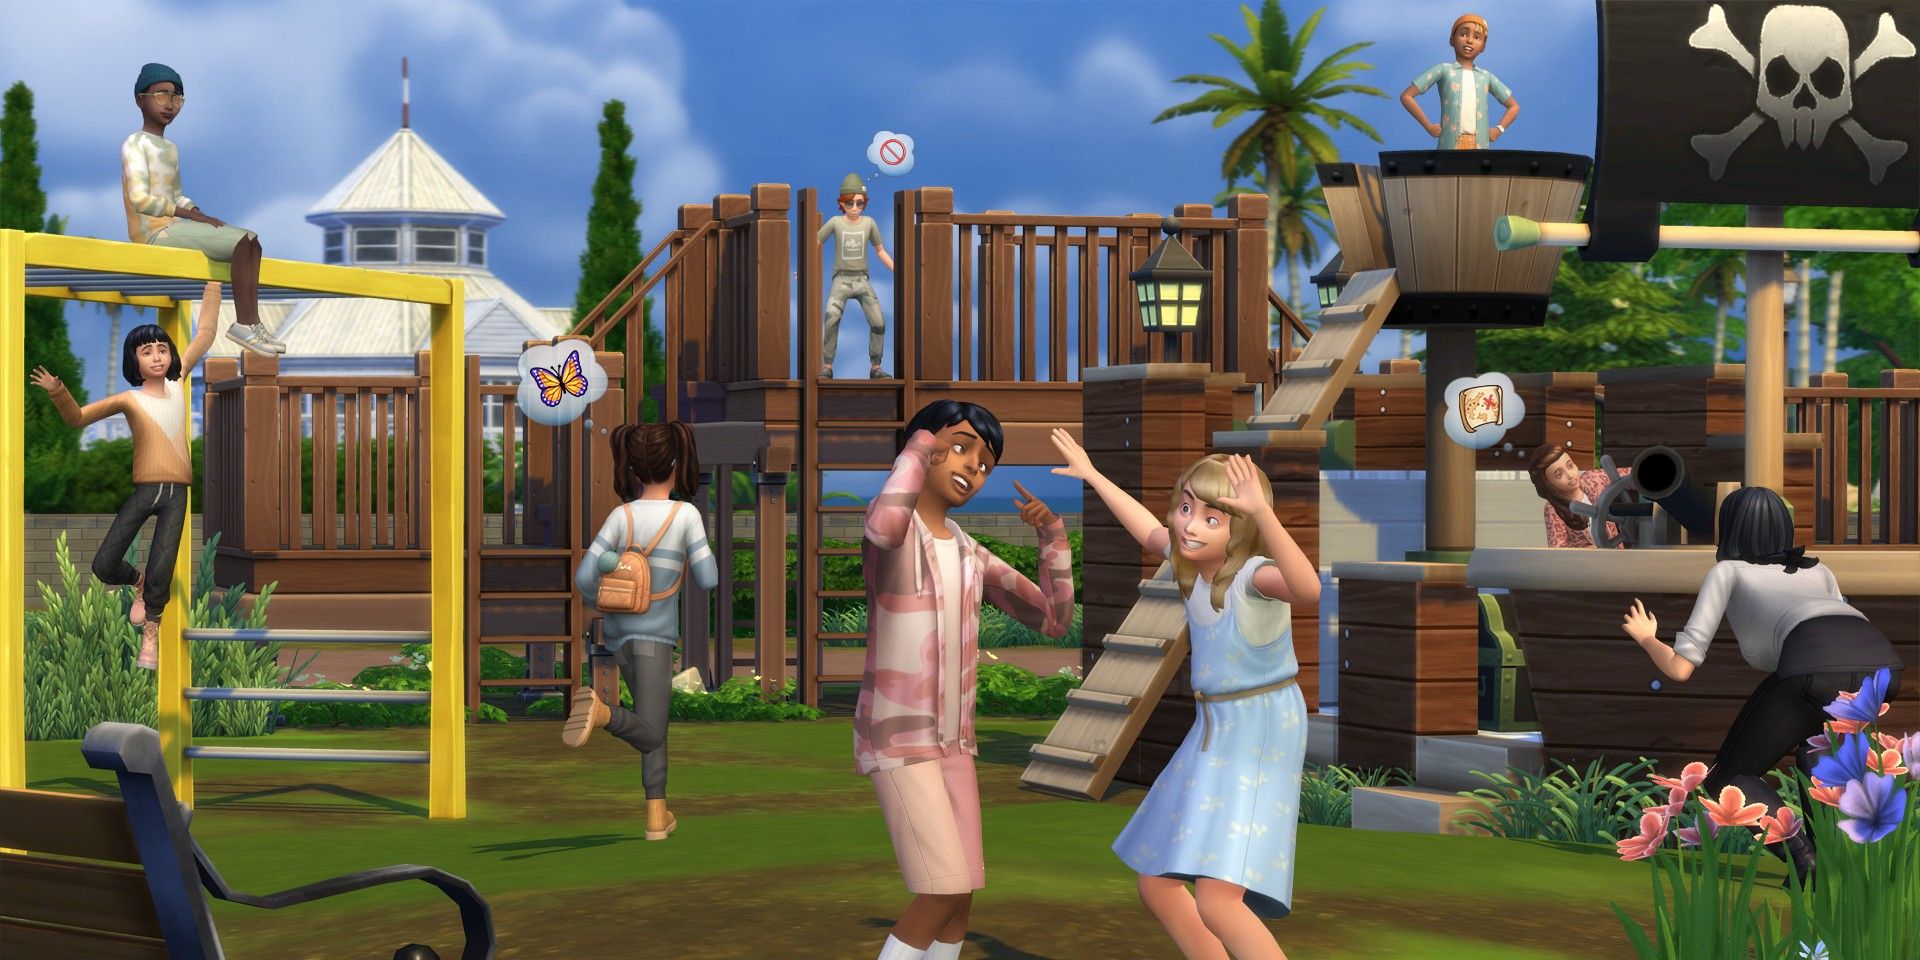 Sims 4 First Fits Kit promo shot of children playing on a playground.